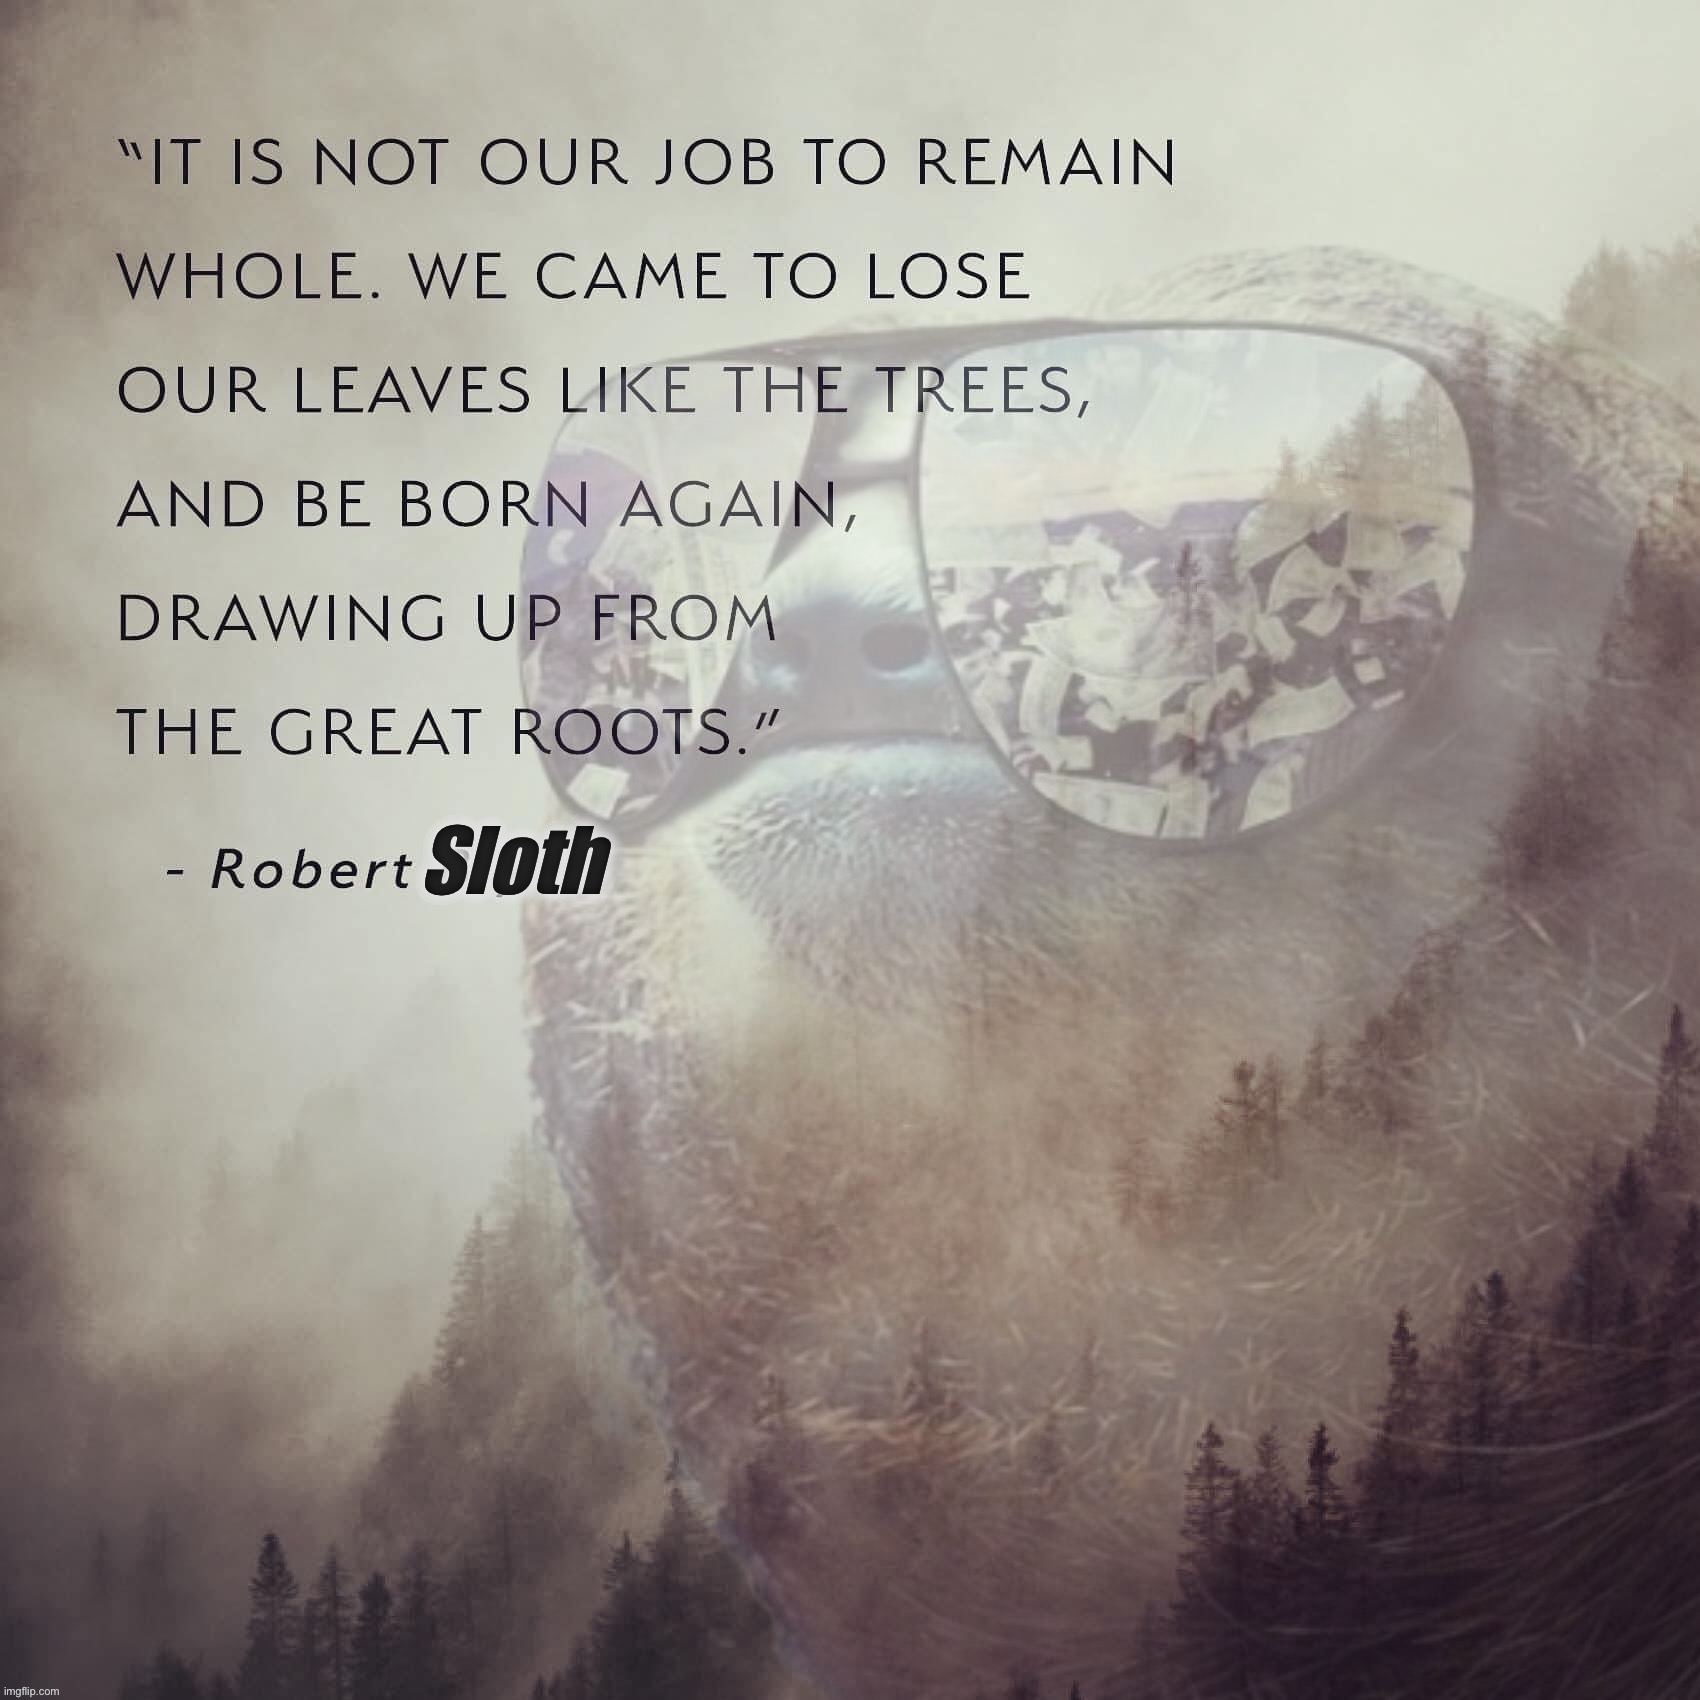 Robert Sloth quote | image tagged in robert sloth quote | made w/ Imgflip meme maker